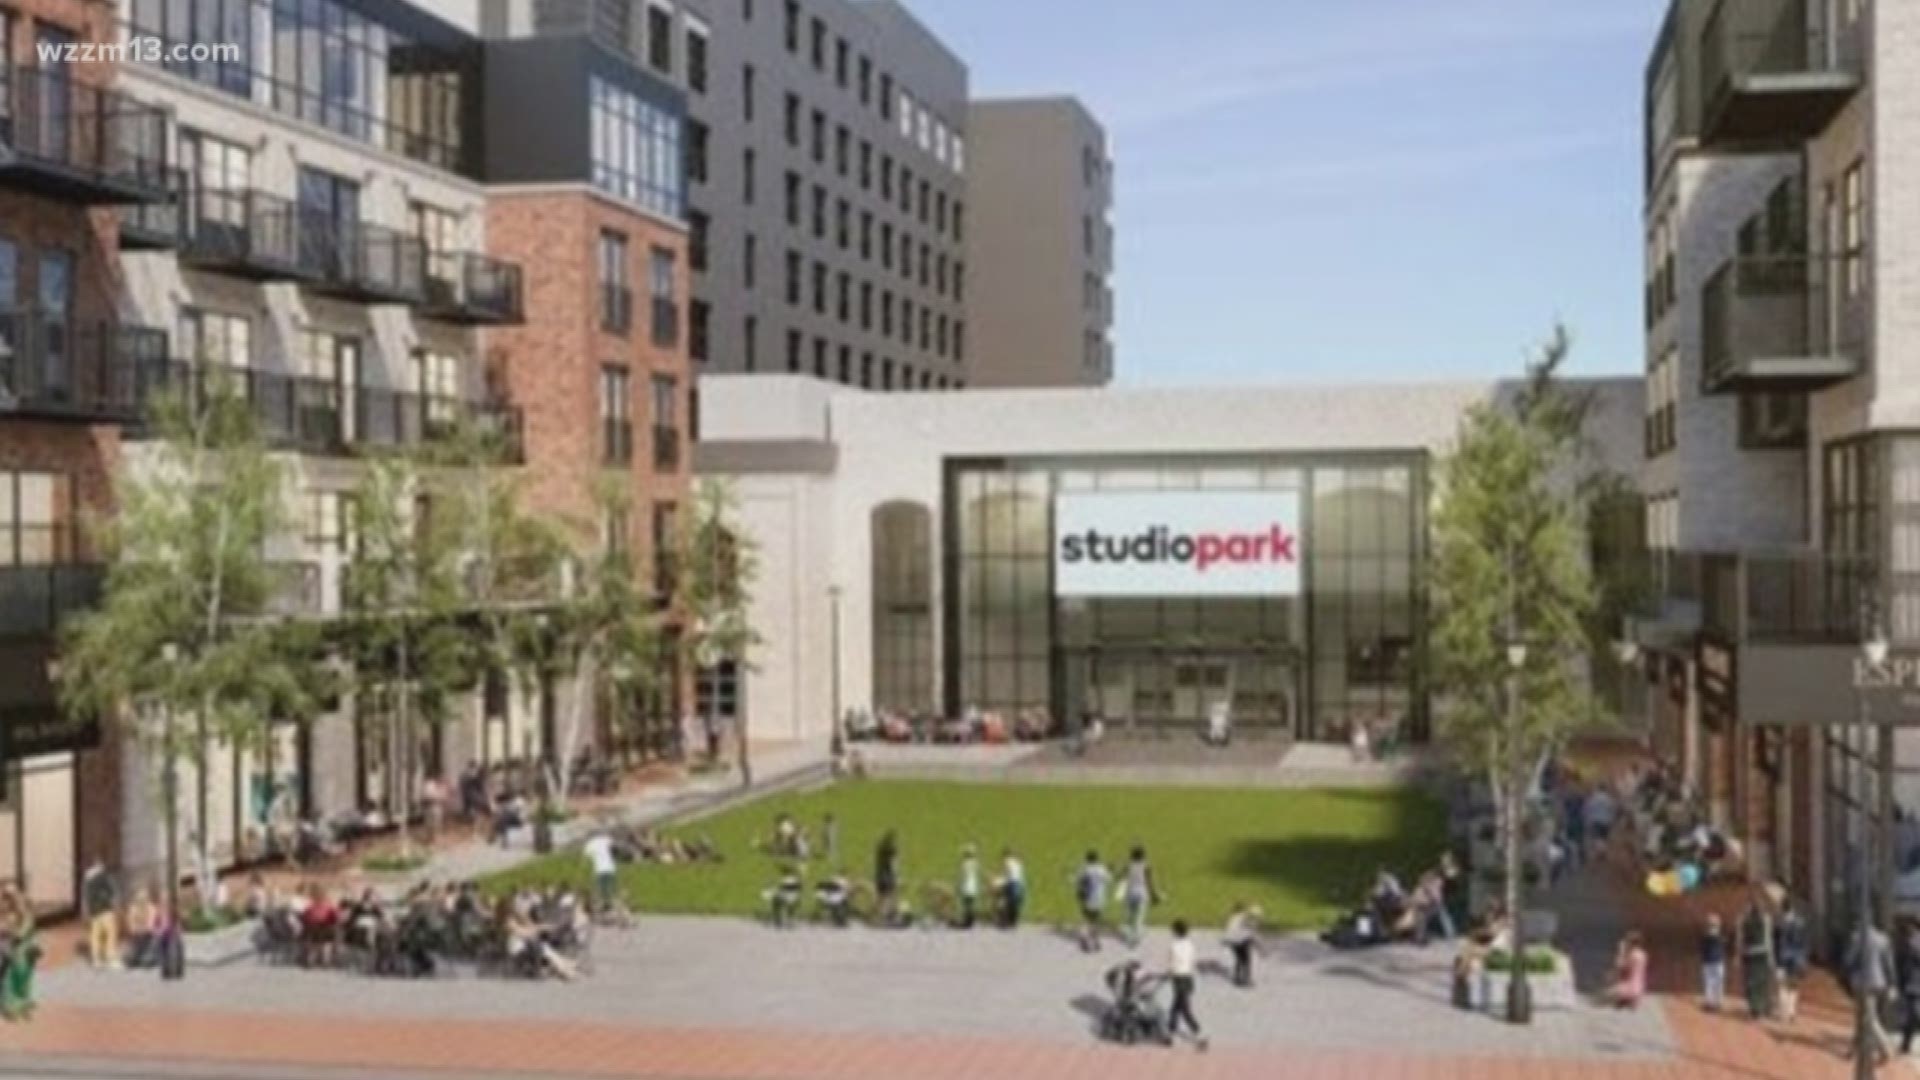 Five major retailers including a flagship restaurant are among the first businesses announced at Studio Park.